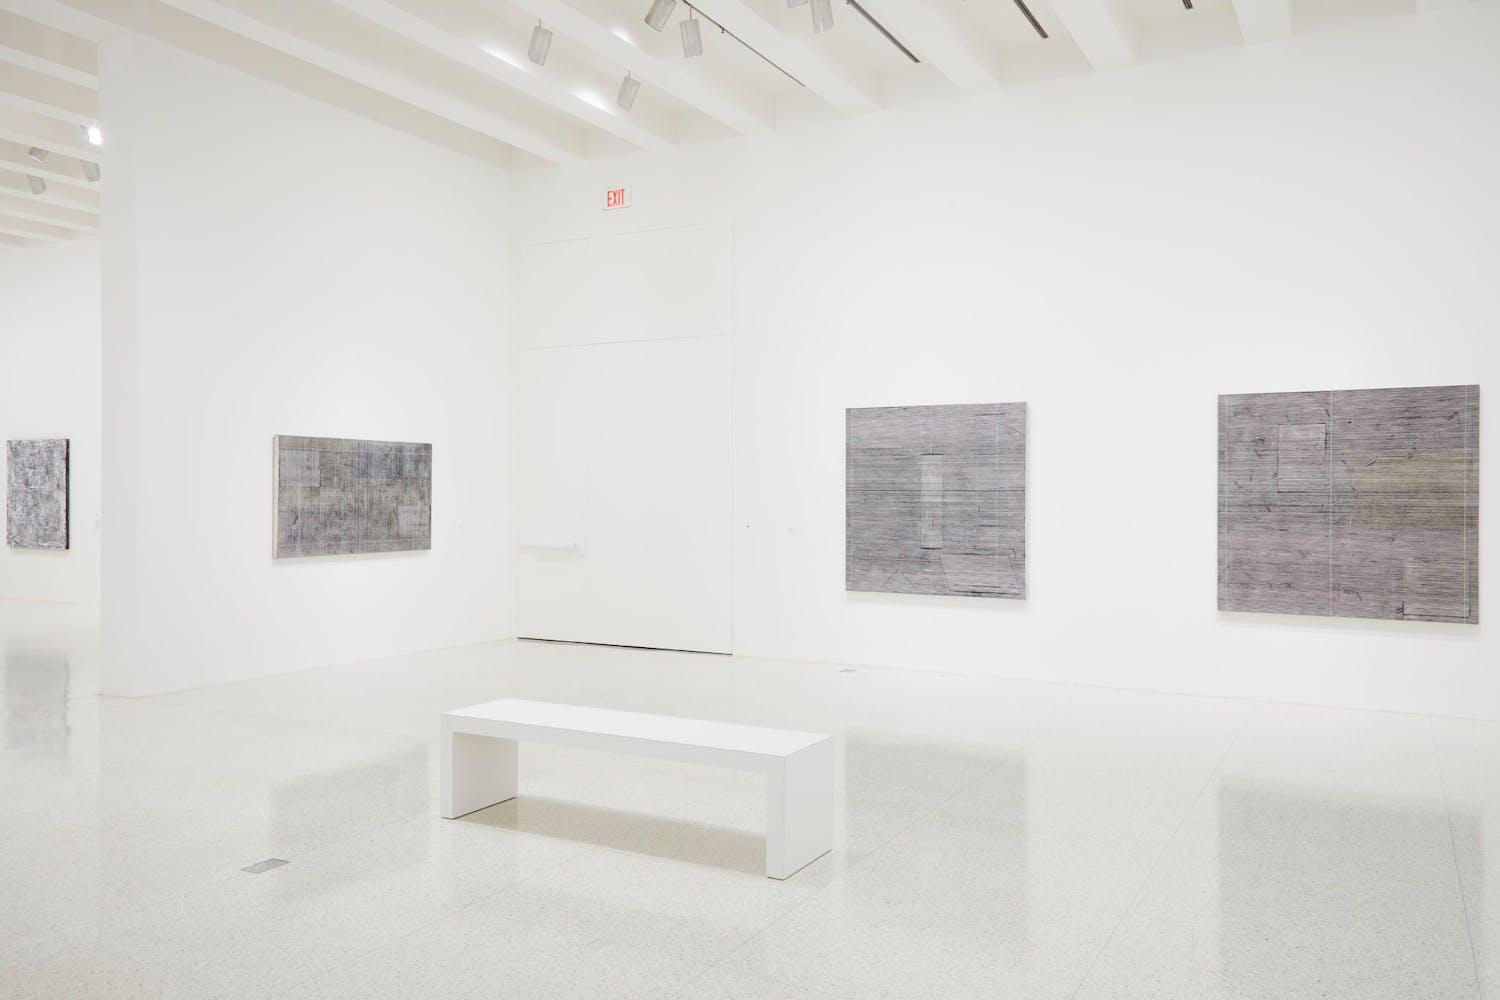 View of the exhibition Jack Whitten: Five Decades of Painting, 2015